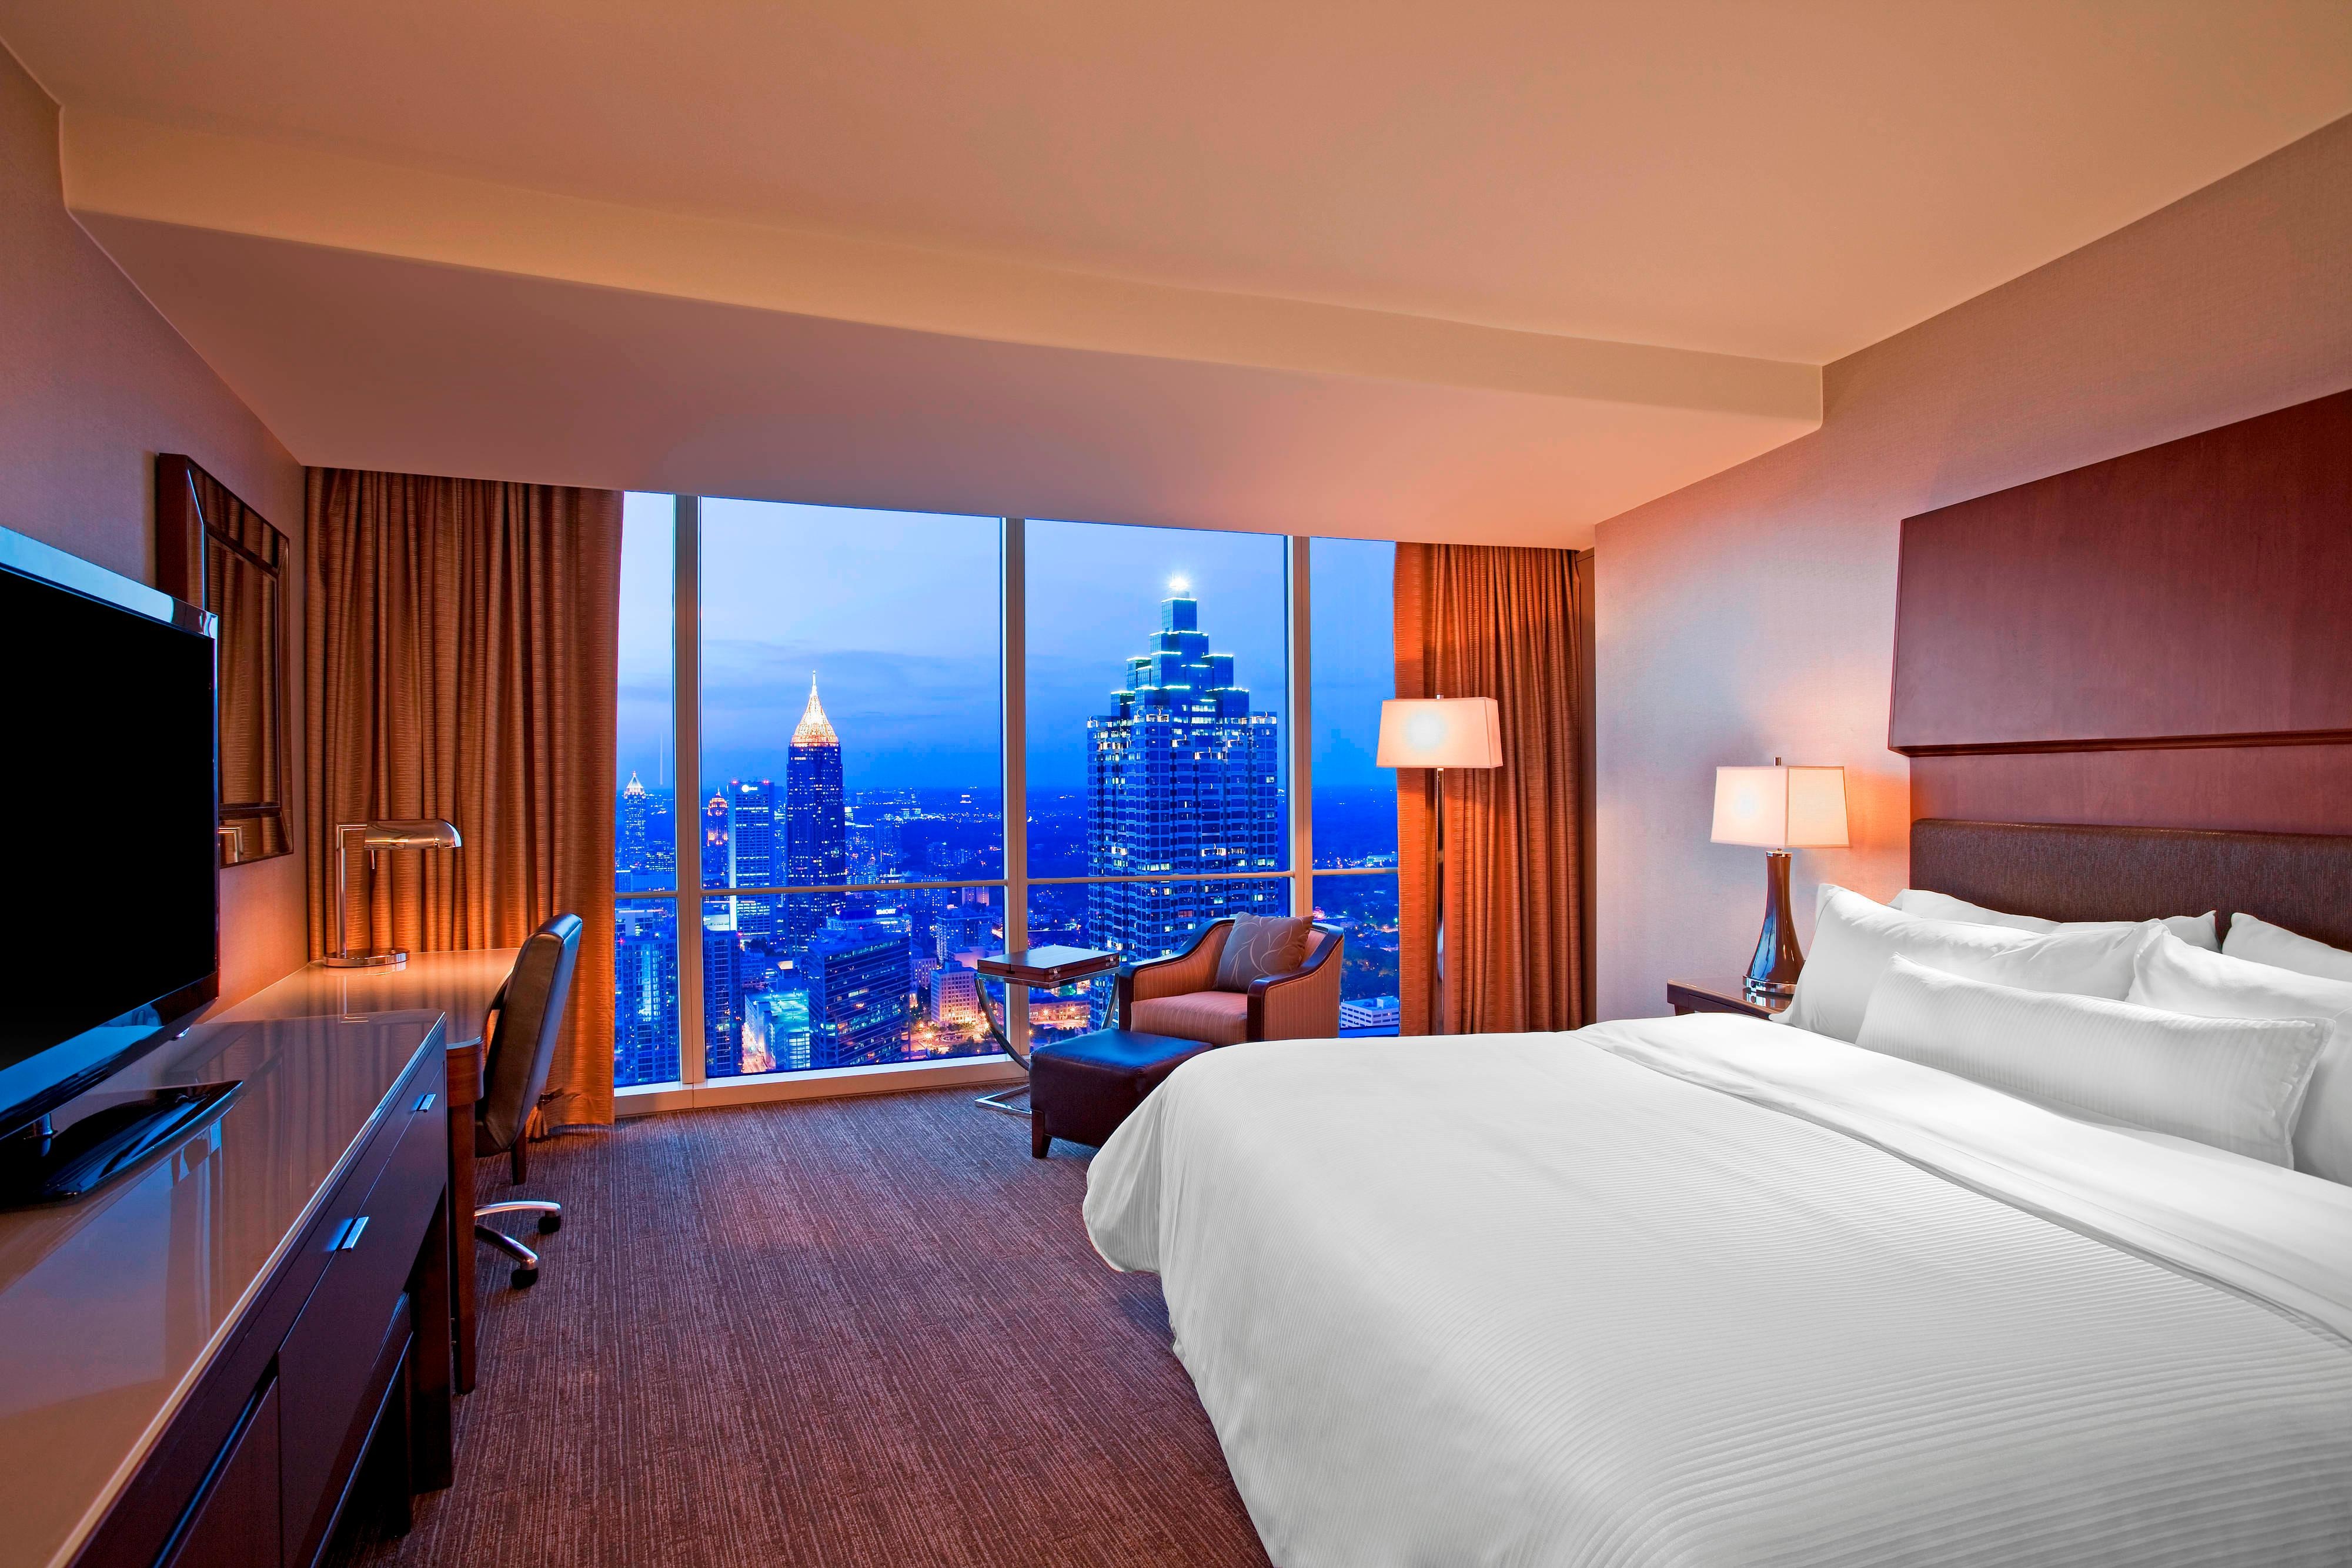 Premium king bed guest room. The Atlanta skyline is visibile from window